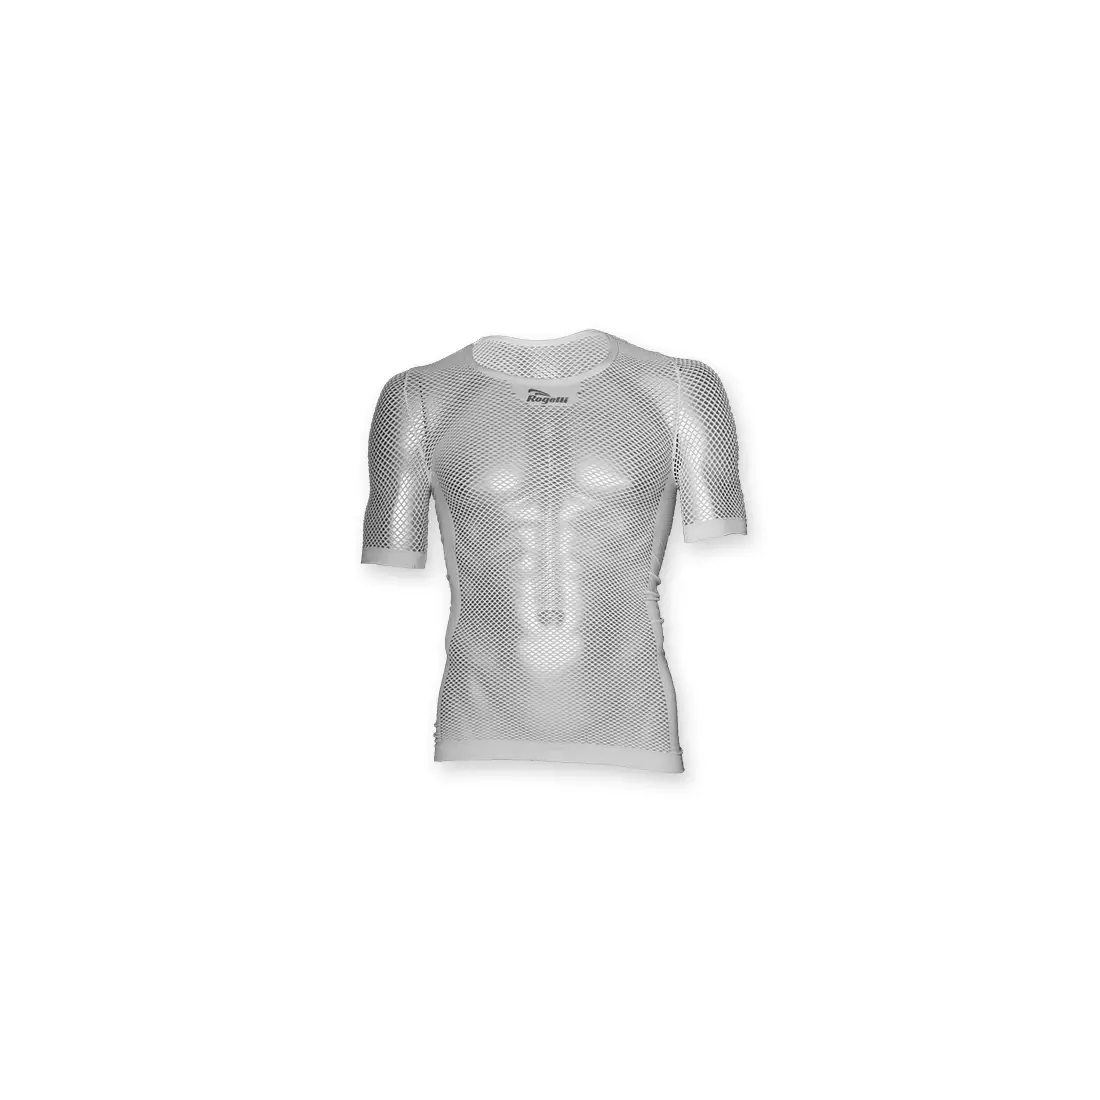 ROGELLI AIR - thermal underwear - short-sleeved T-shirt - color: White